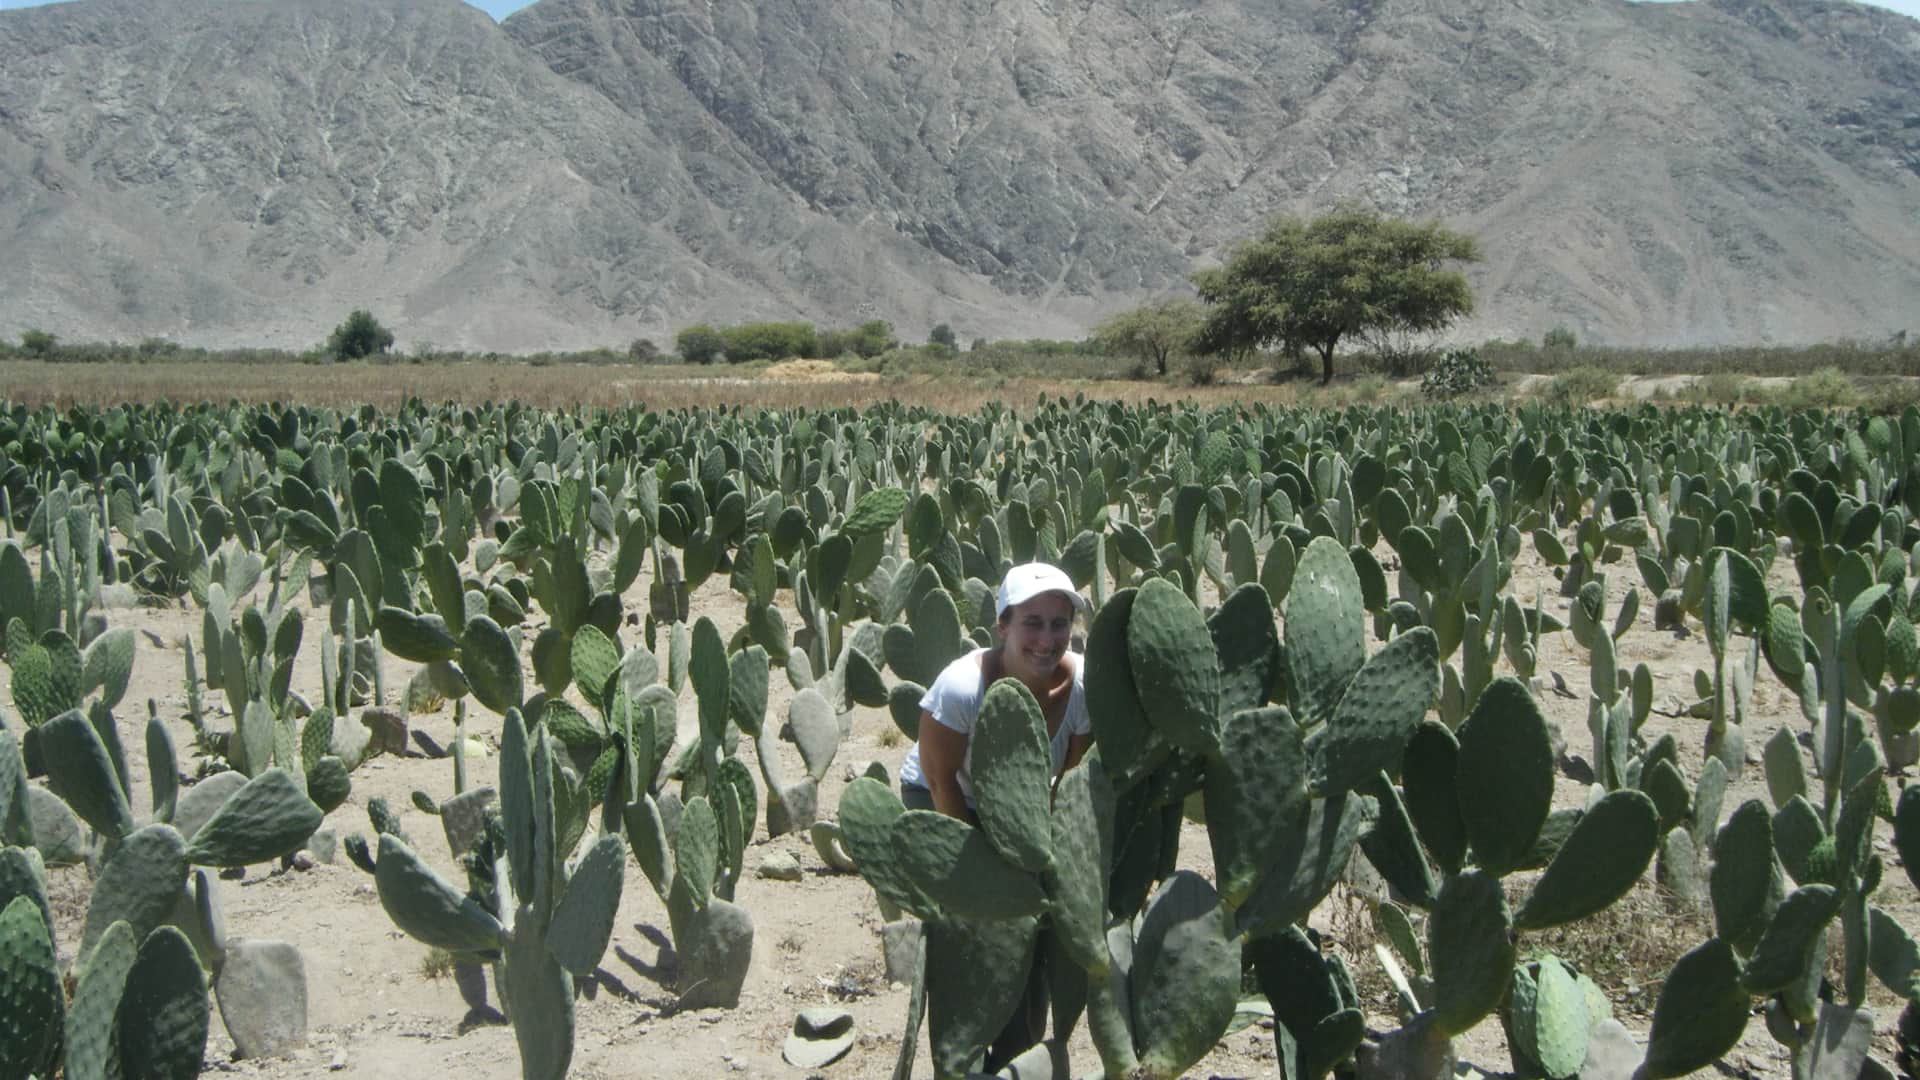 Walking through a field of cactus from which the cochineal is extracted, much appreciated in the world of textiles and gastronomy as a natural dye | Responsible Travel Peru